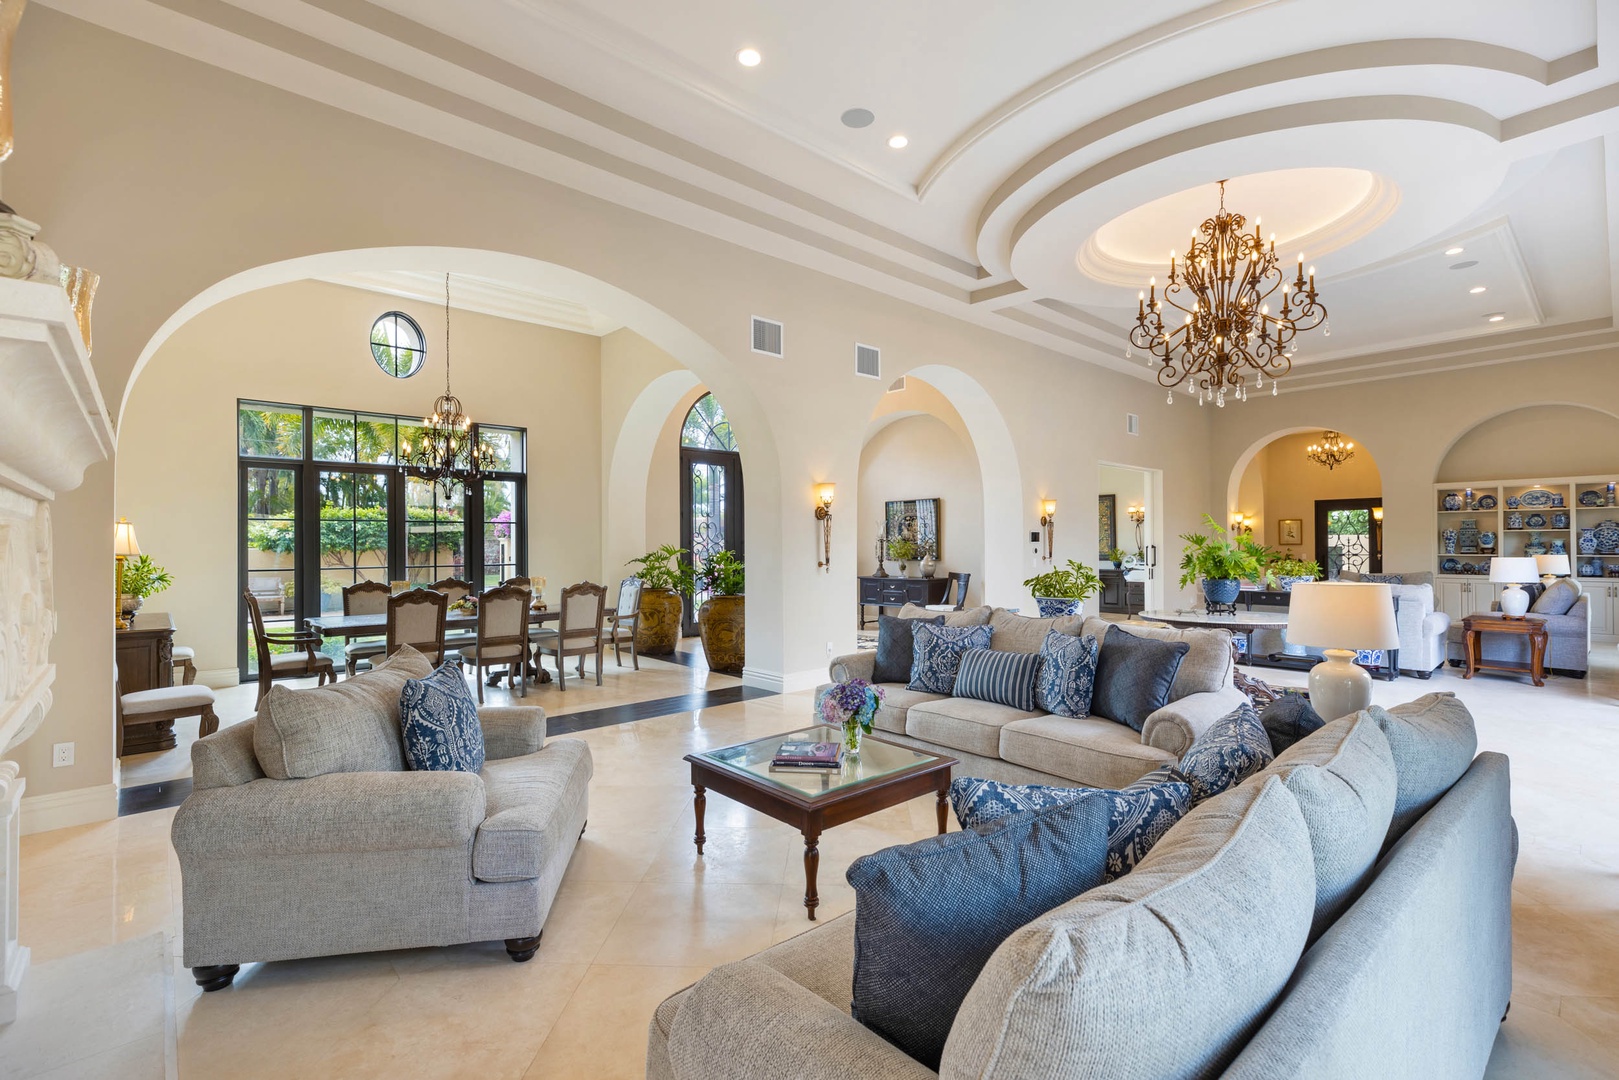 Honolulu Vacation Rentals, The Kahala Mansion - The spacious open floor plan perfect for entertaining and relaxing.